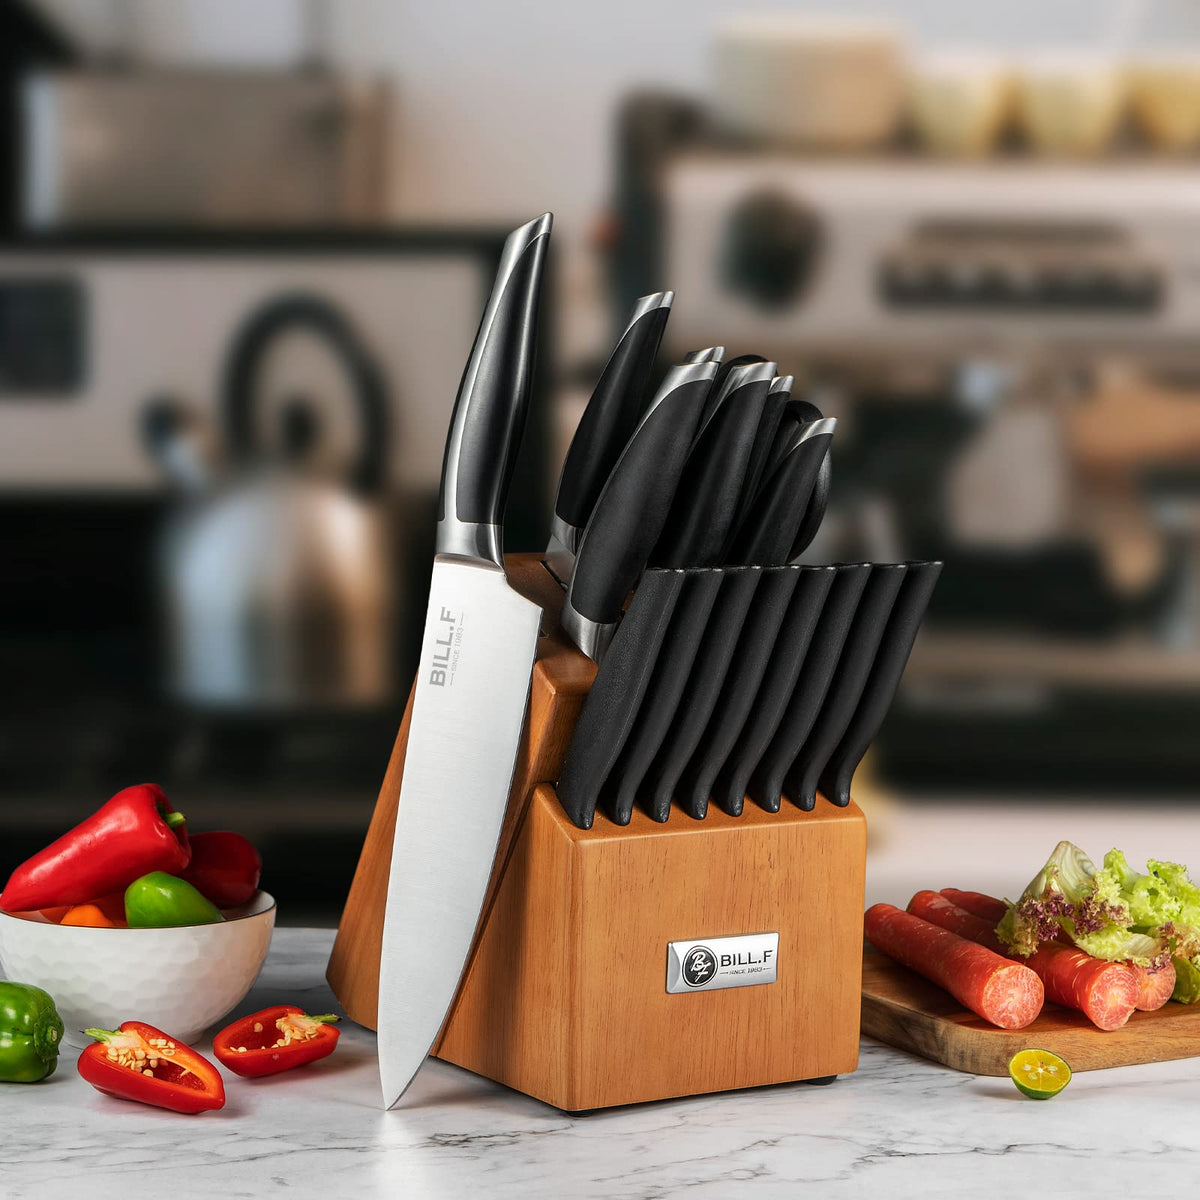 BILL.F 14 Pieces Kitchen Knife Set with Block and Sharpener, Stainless Steel Knives Kitchen Set Including Scissors